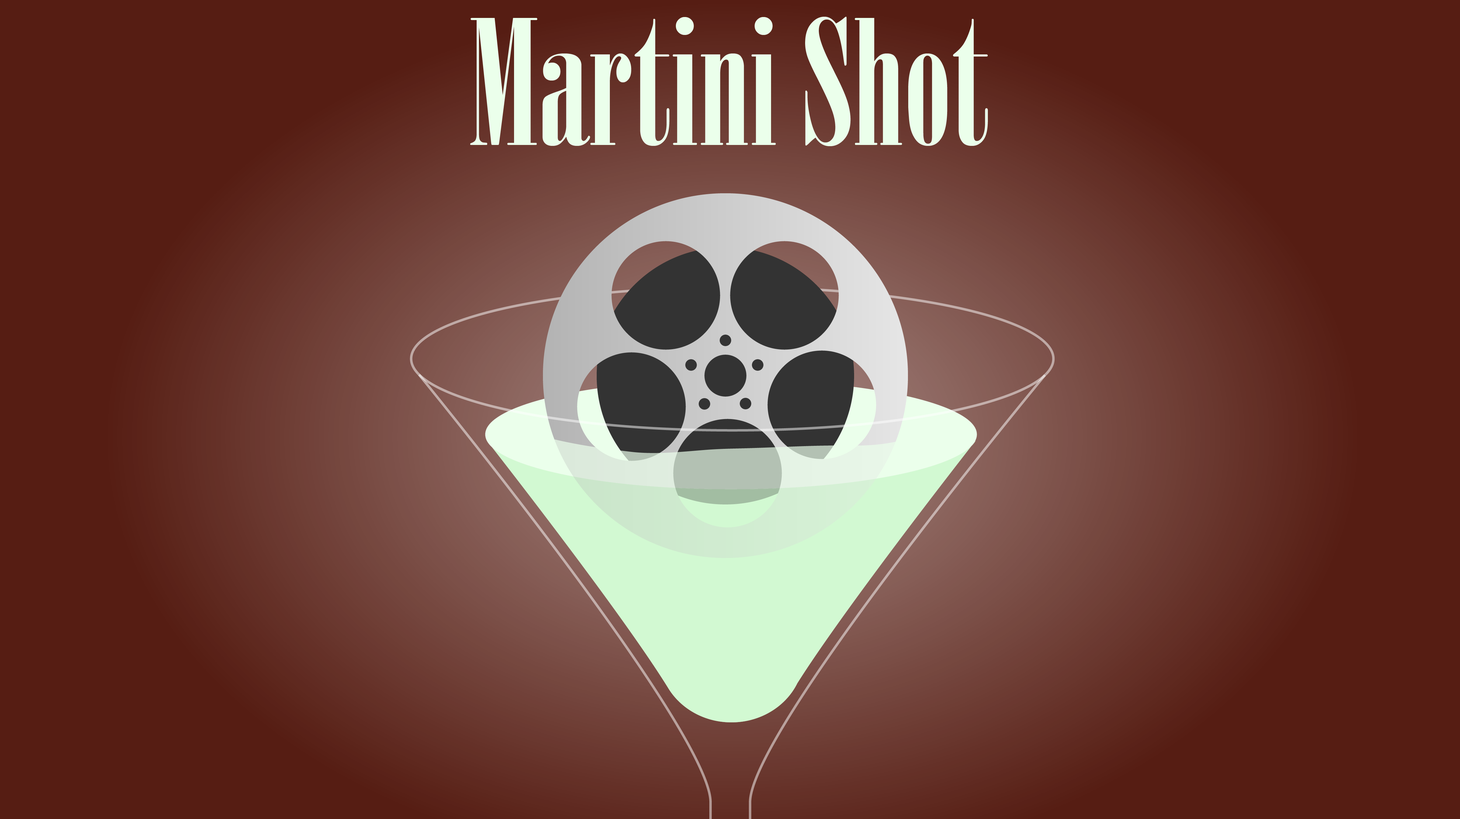 On today's Happy New Year Martini Shot, Rob Long talks about the Golden Globes, fifth grade math tests, and North Korean dictator Kim Jong Il...